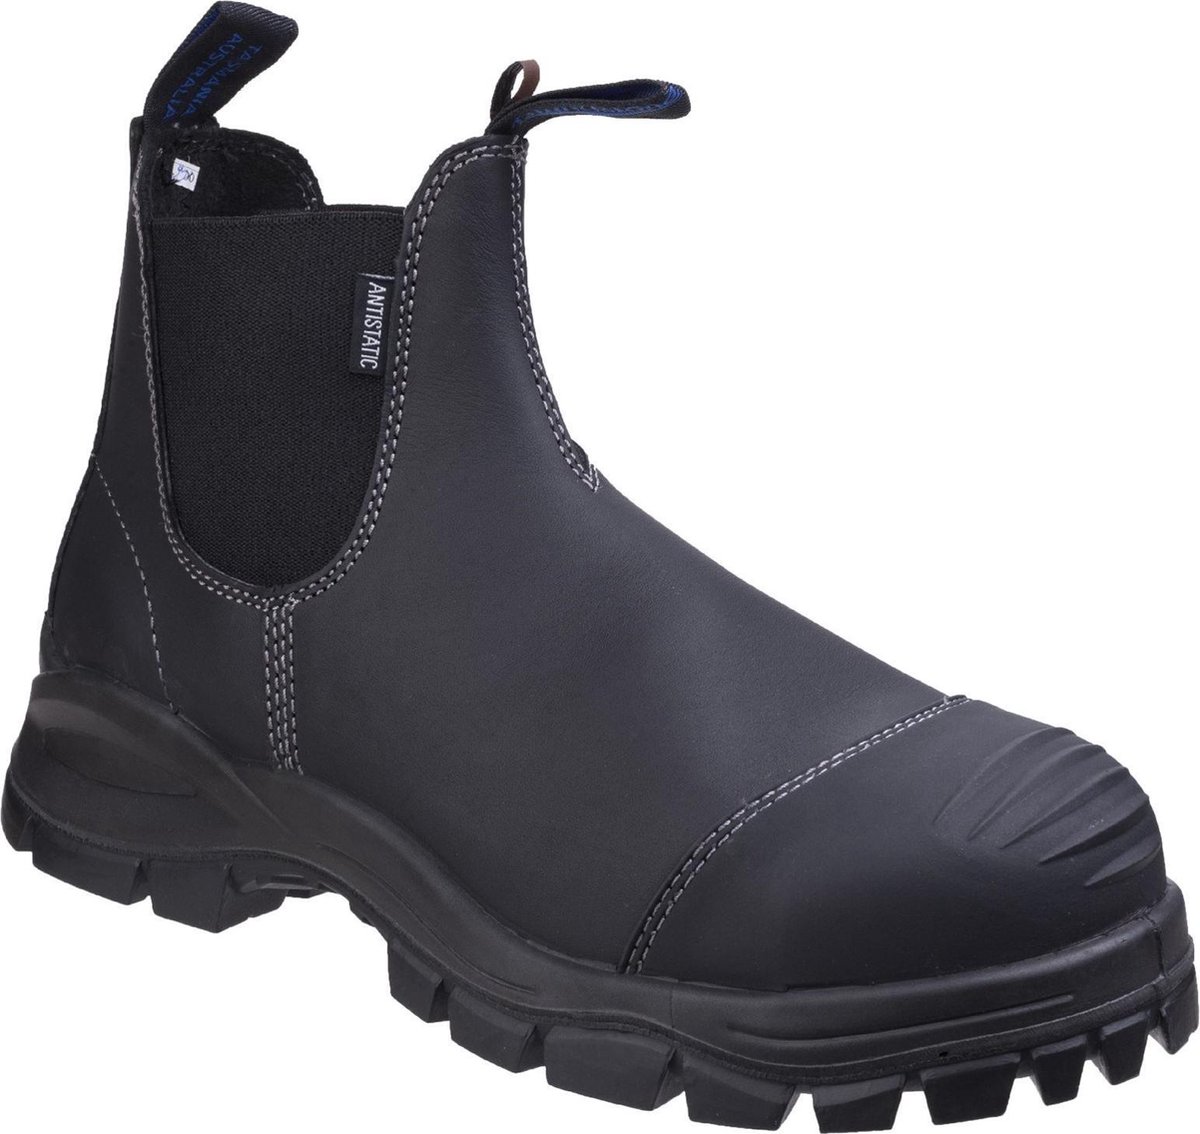 Blundstone Male Stiefel Boots #910 Black Platinum Leather (Safety Series)-11UK